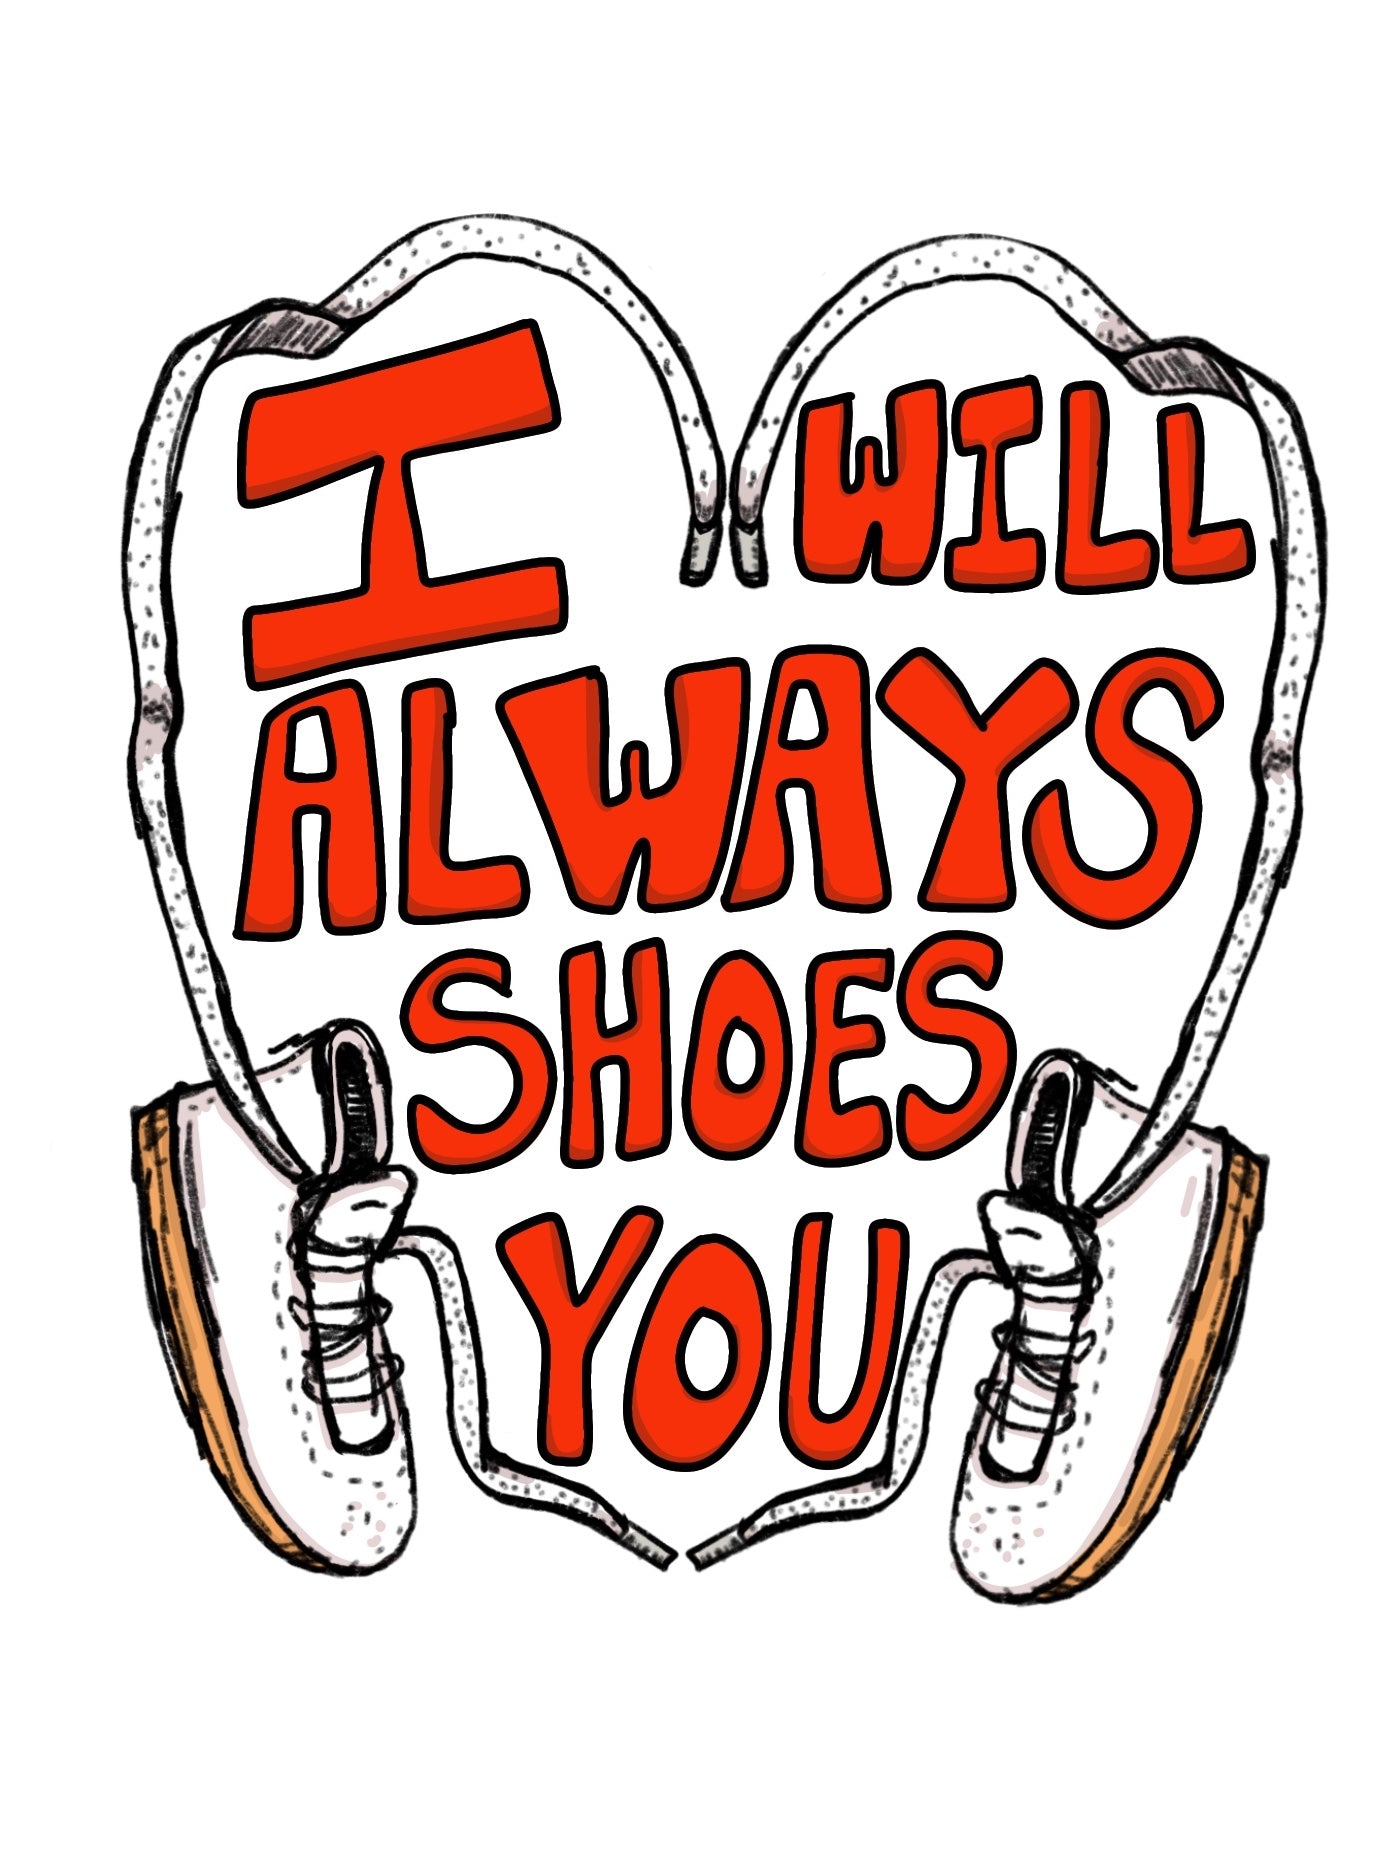 I Will Always Shoes You